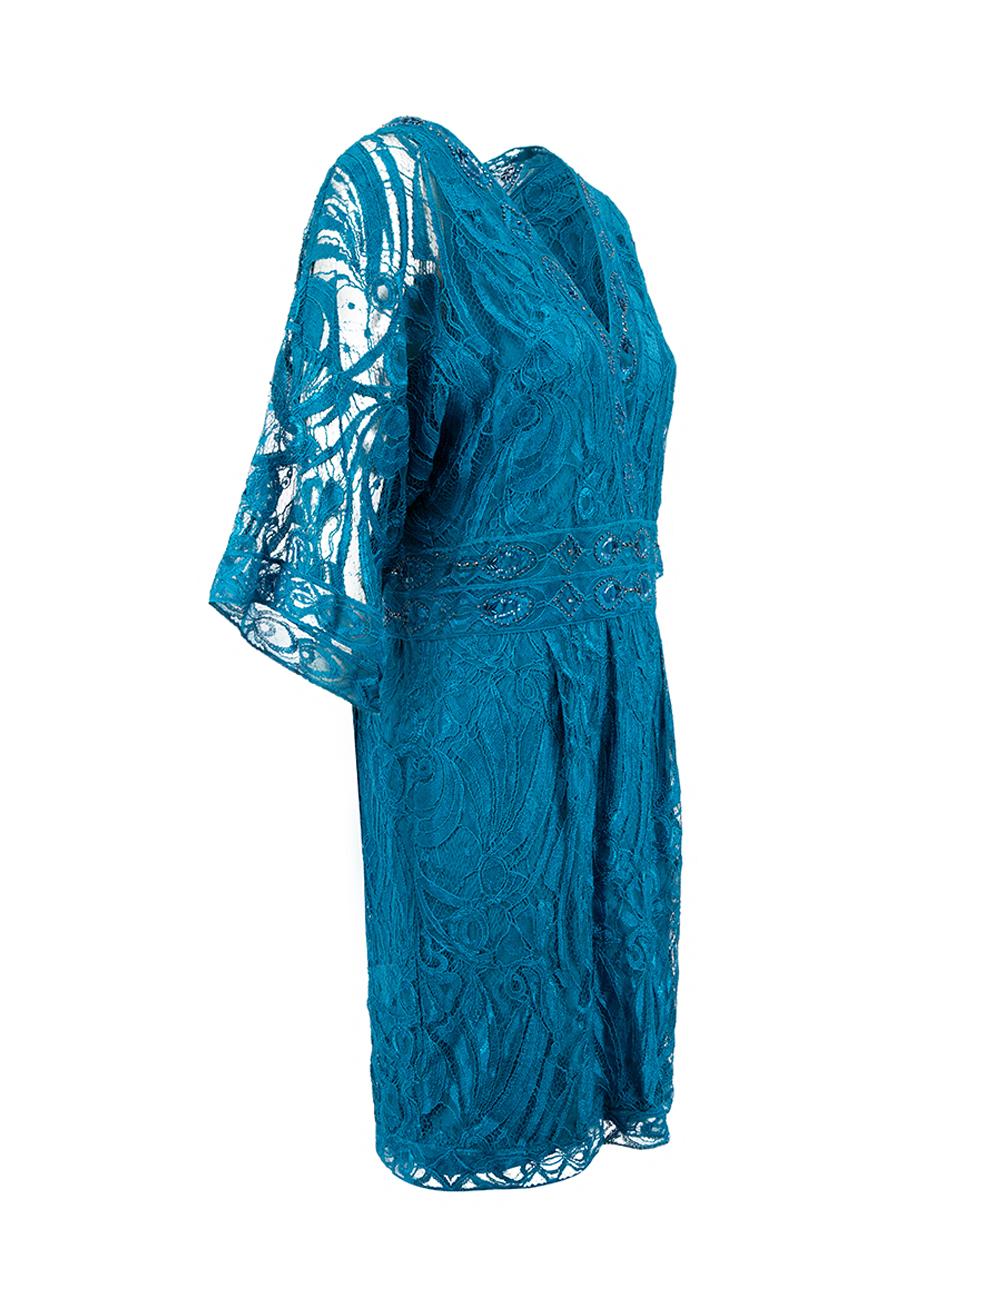 CONDITION is Very good. Minimal wear to dress is evident. Minimal wear to lace overlay with very minor fraying in spots at the hem on this used Emilio Pucci designer resale item.
  
  Details
  Blue
  Viscose
  Dress
  Lace
  V-neck
  Mini
  Sequin